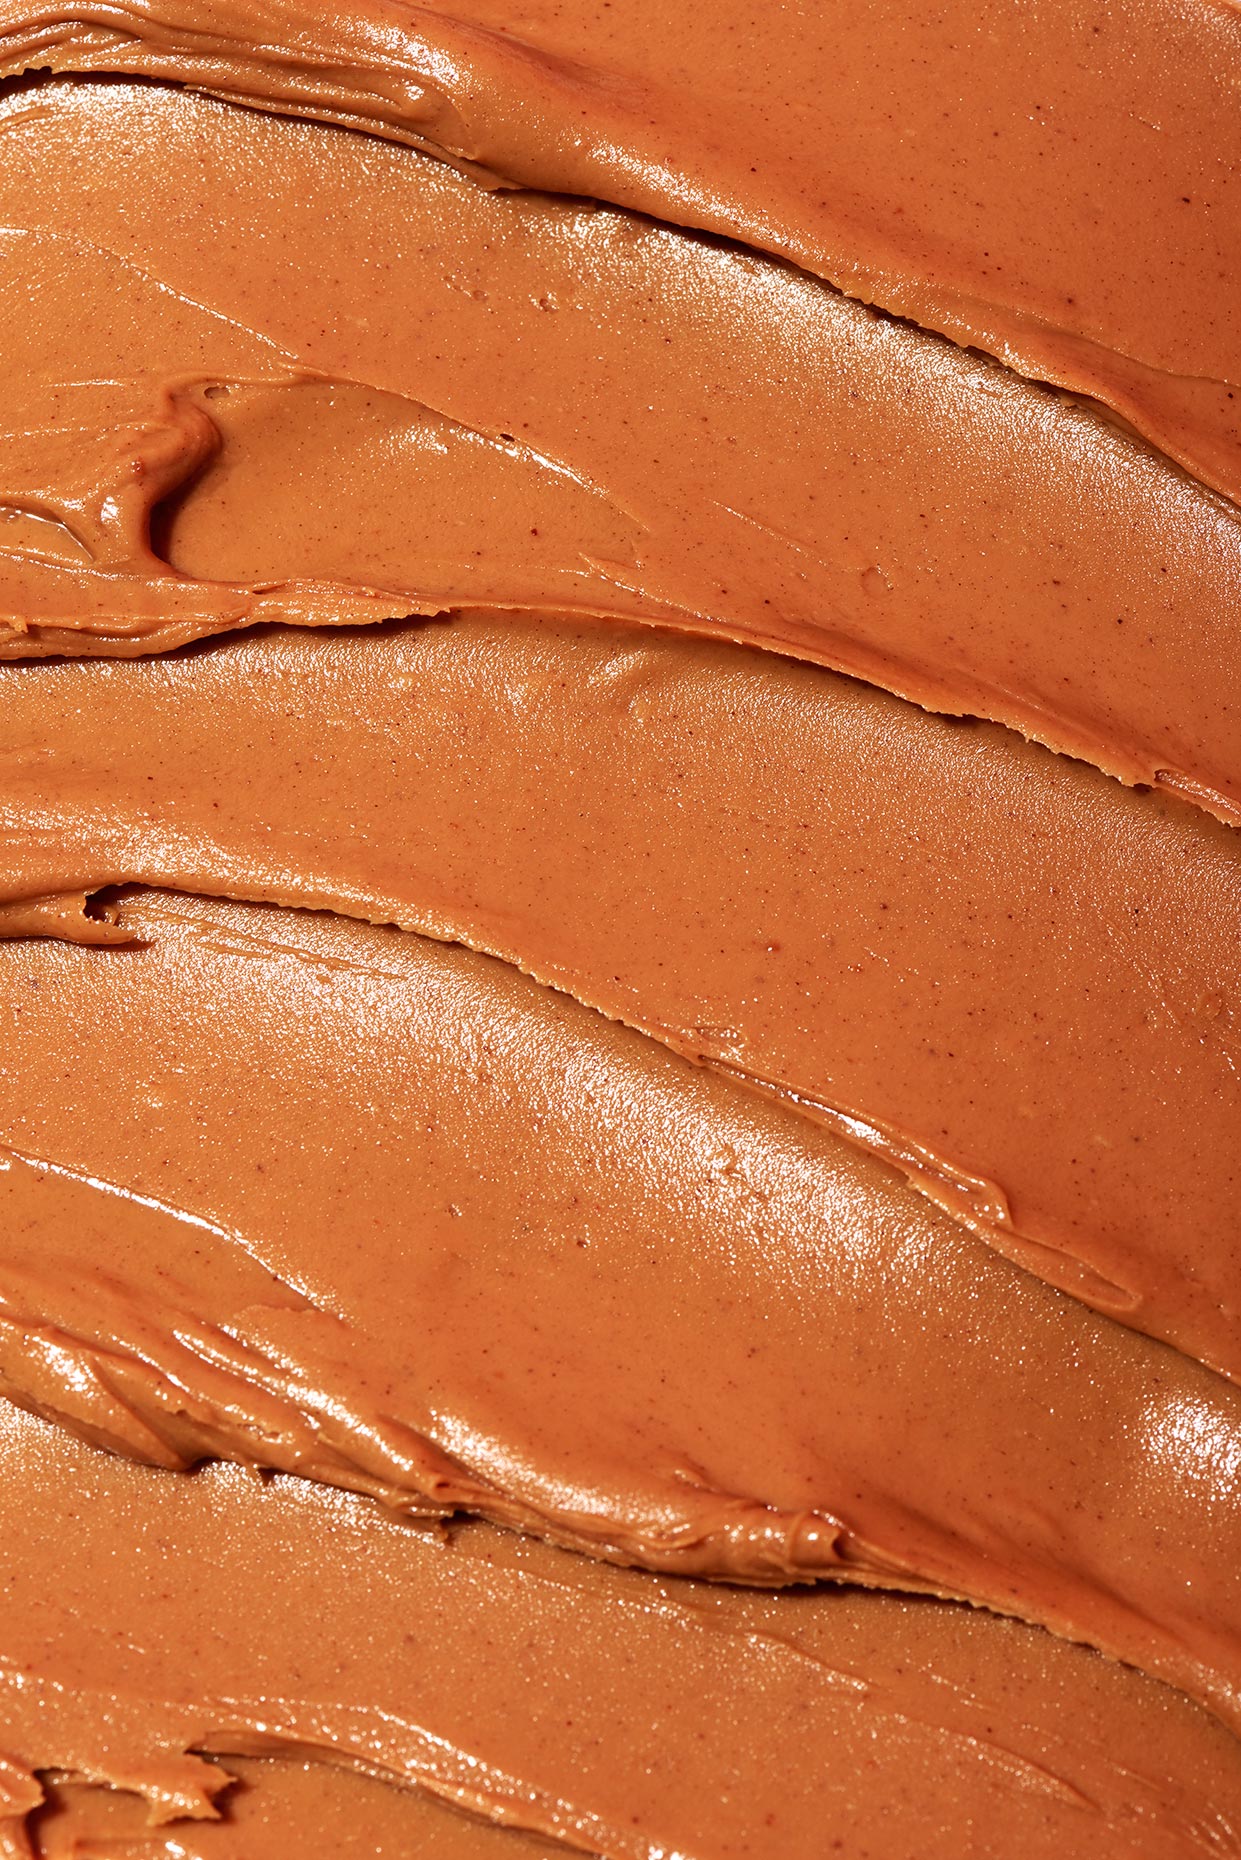 Spread out Peanut butter, photographed by New York Food Photographer Adrian Mueller